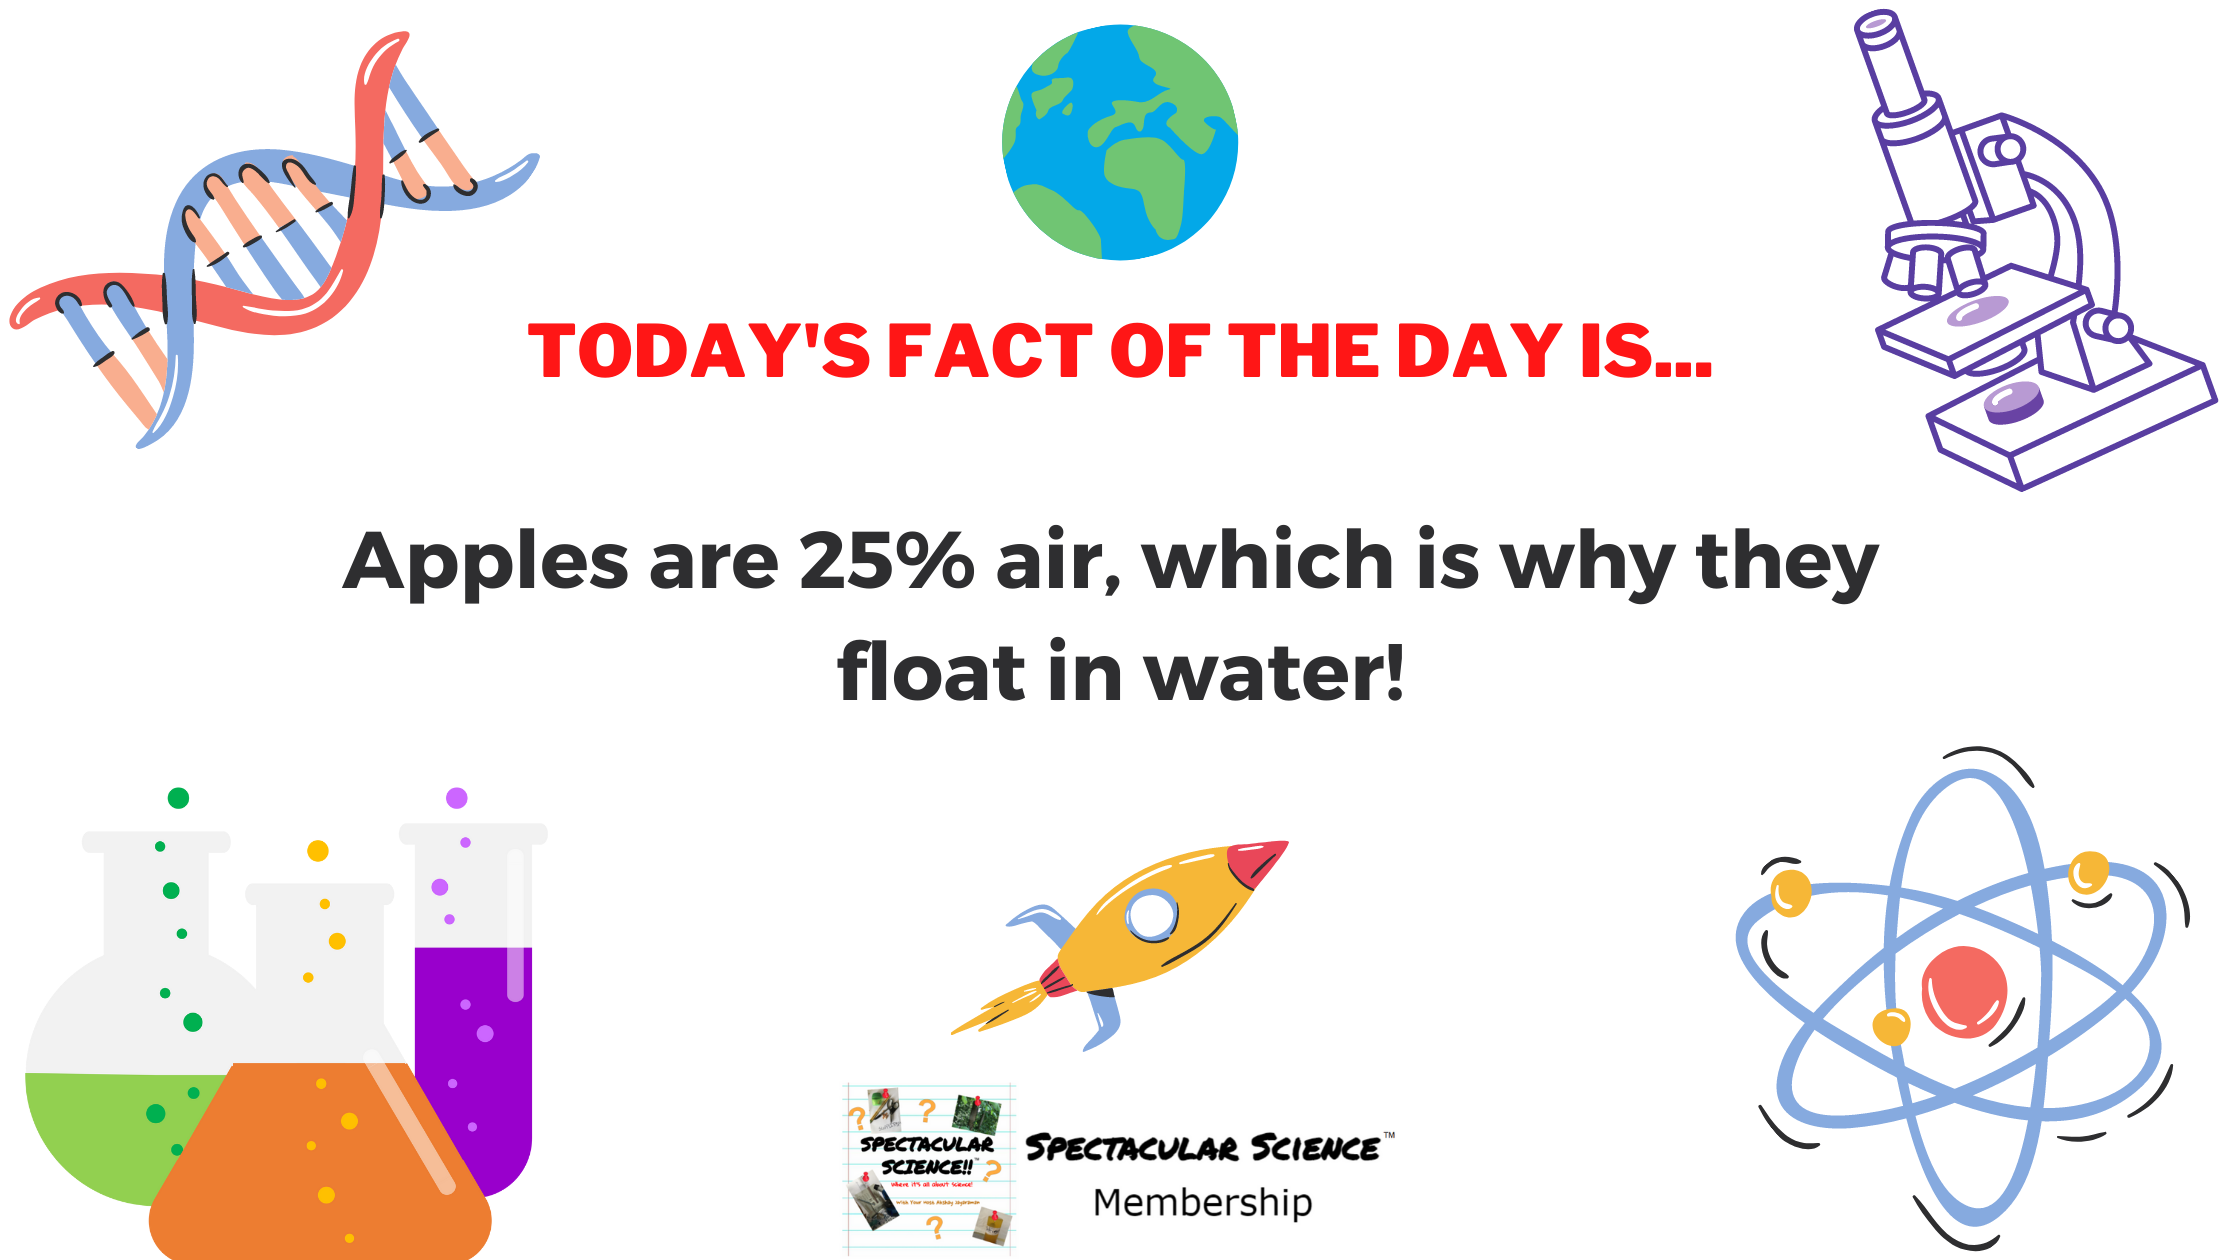 Fact of the Day Image May 11th